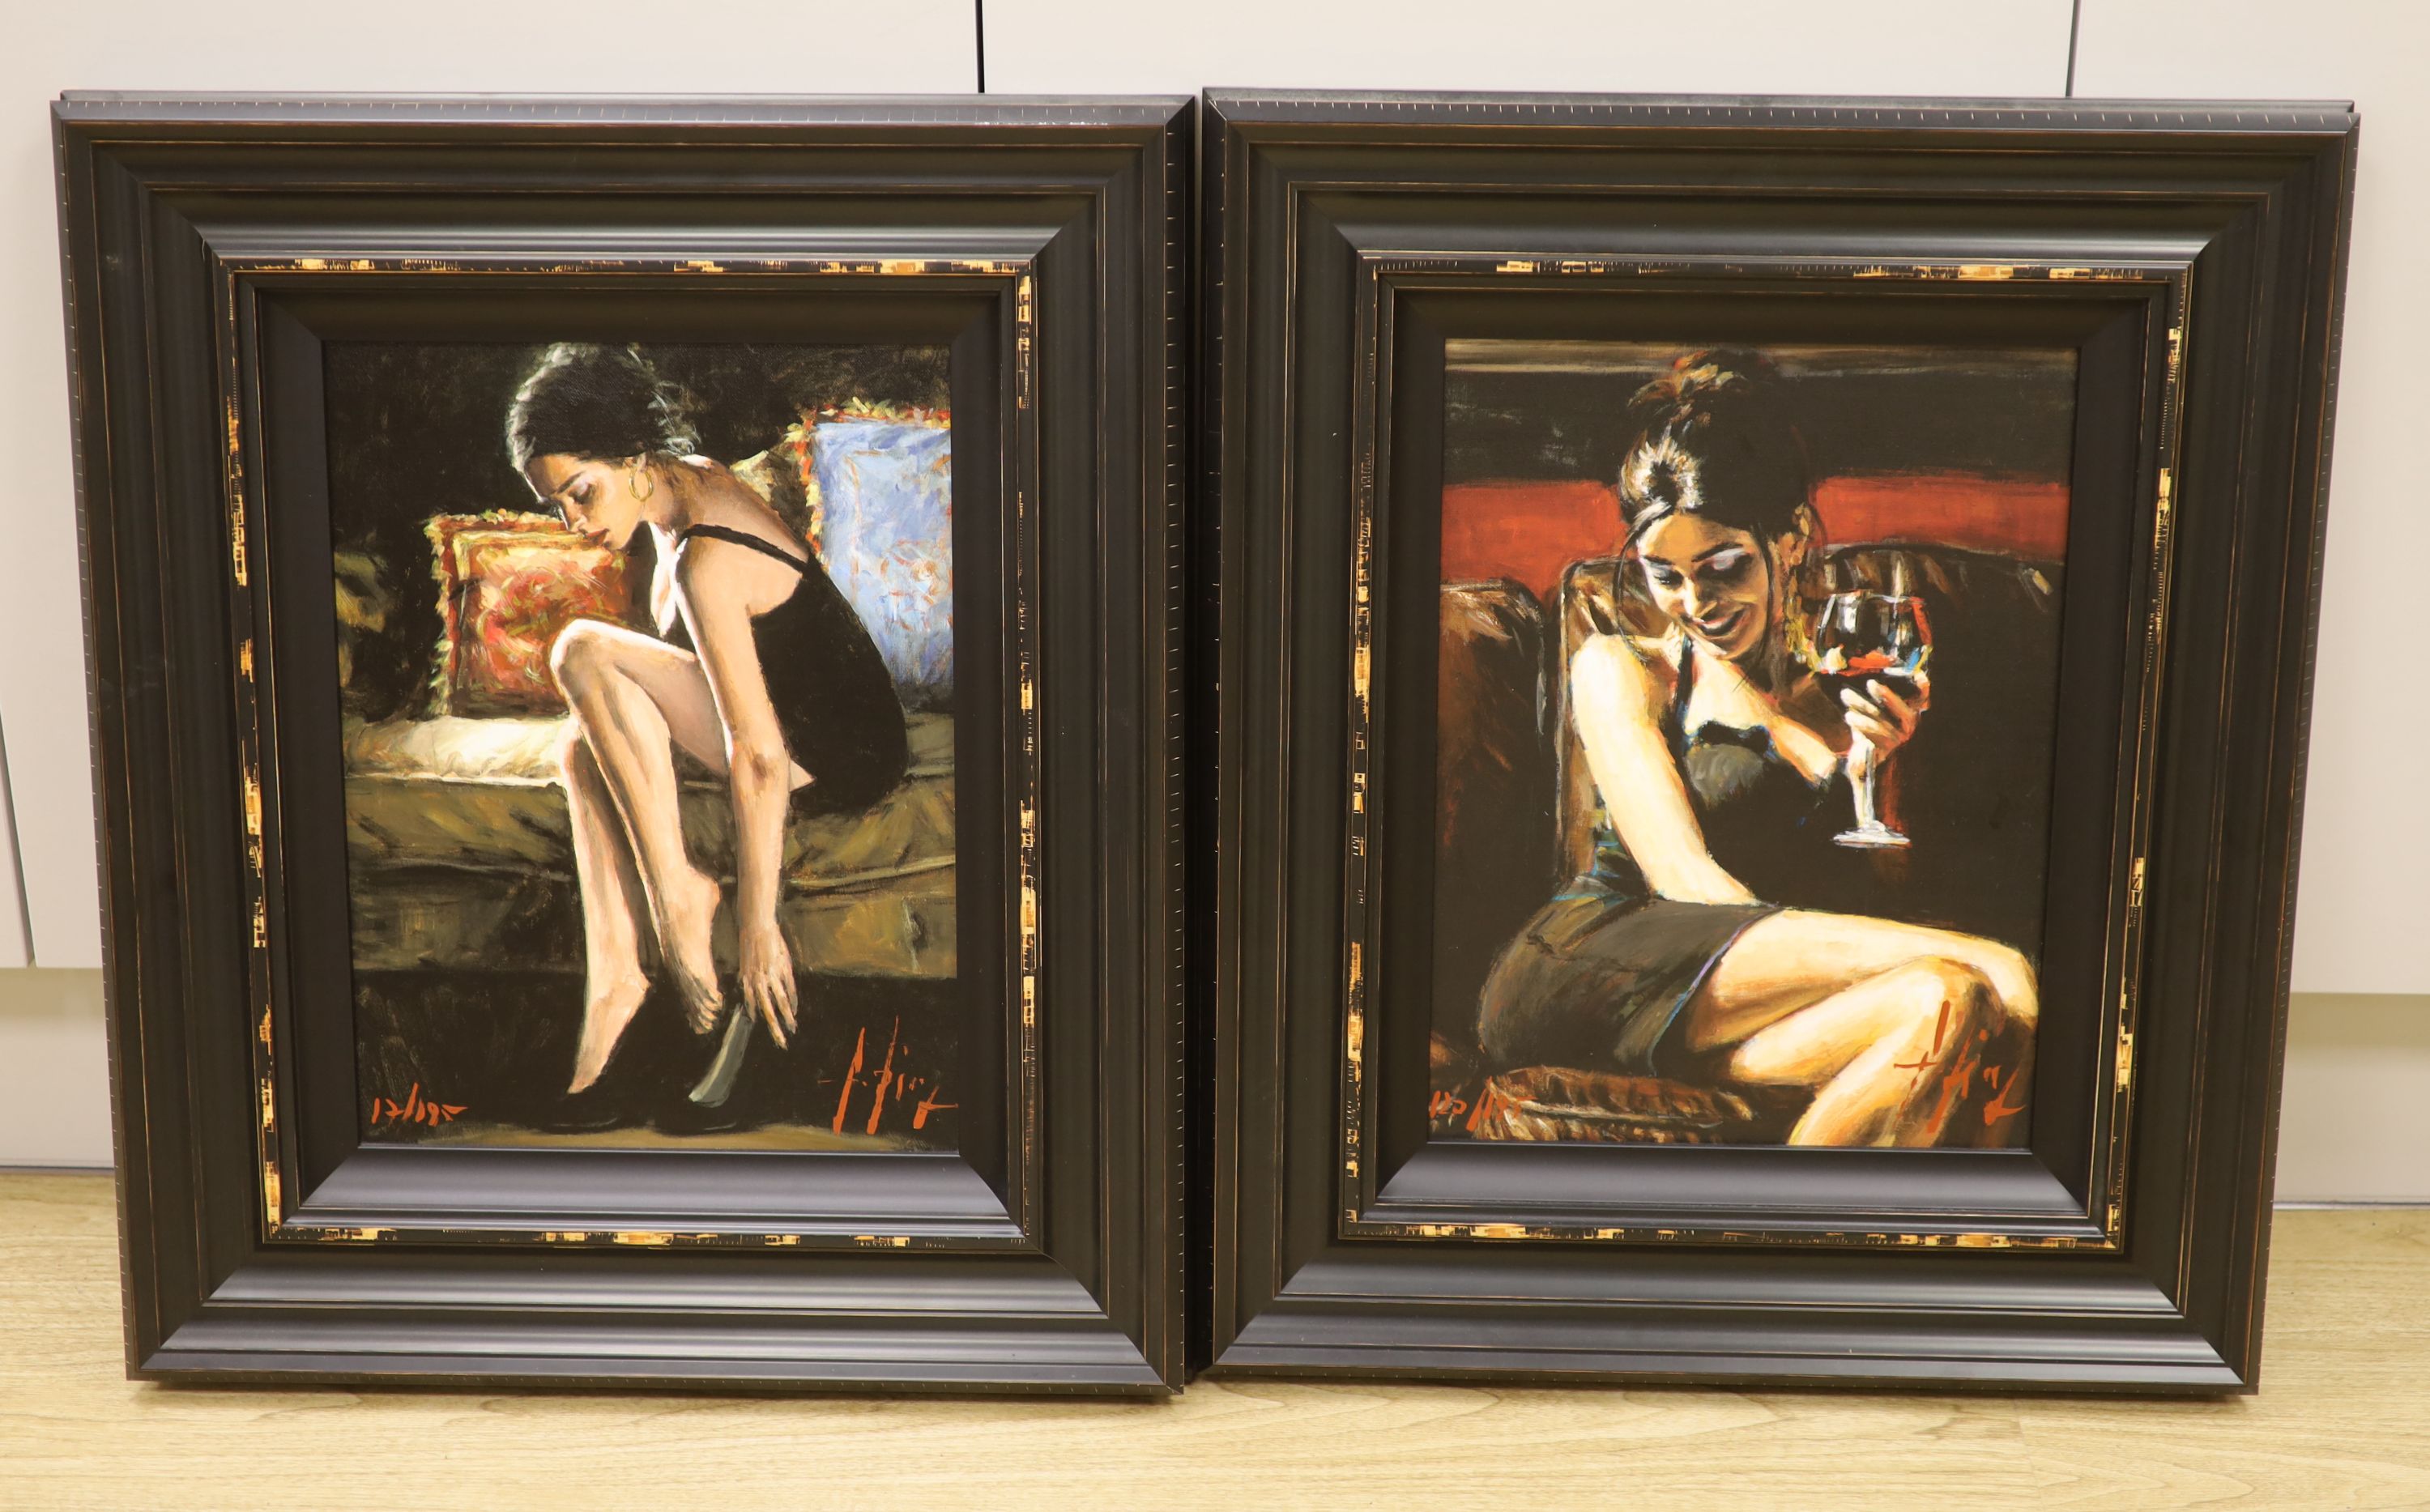 Fabian Perez, two hand embellished glicee canvases, Blue and Red III, 17/195 and Tess VII, 120/195, both with COA, 40 x 30cm